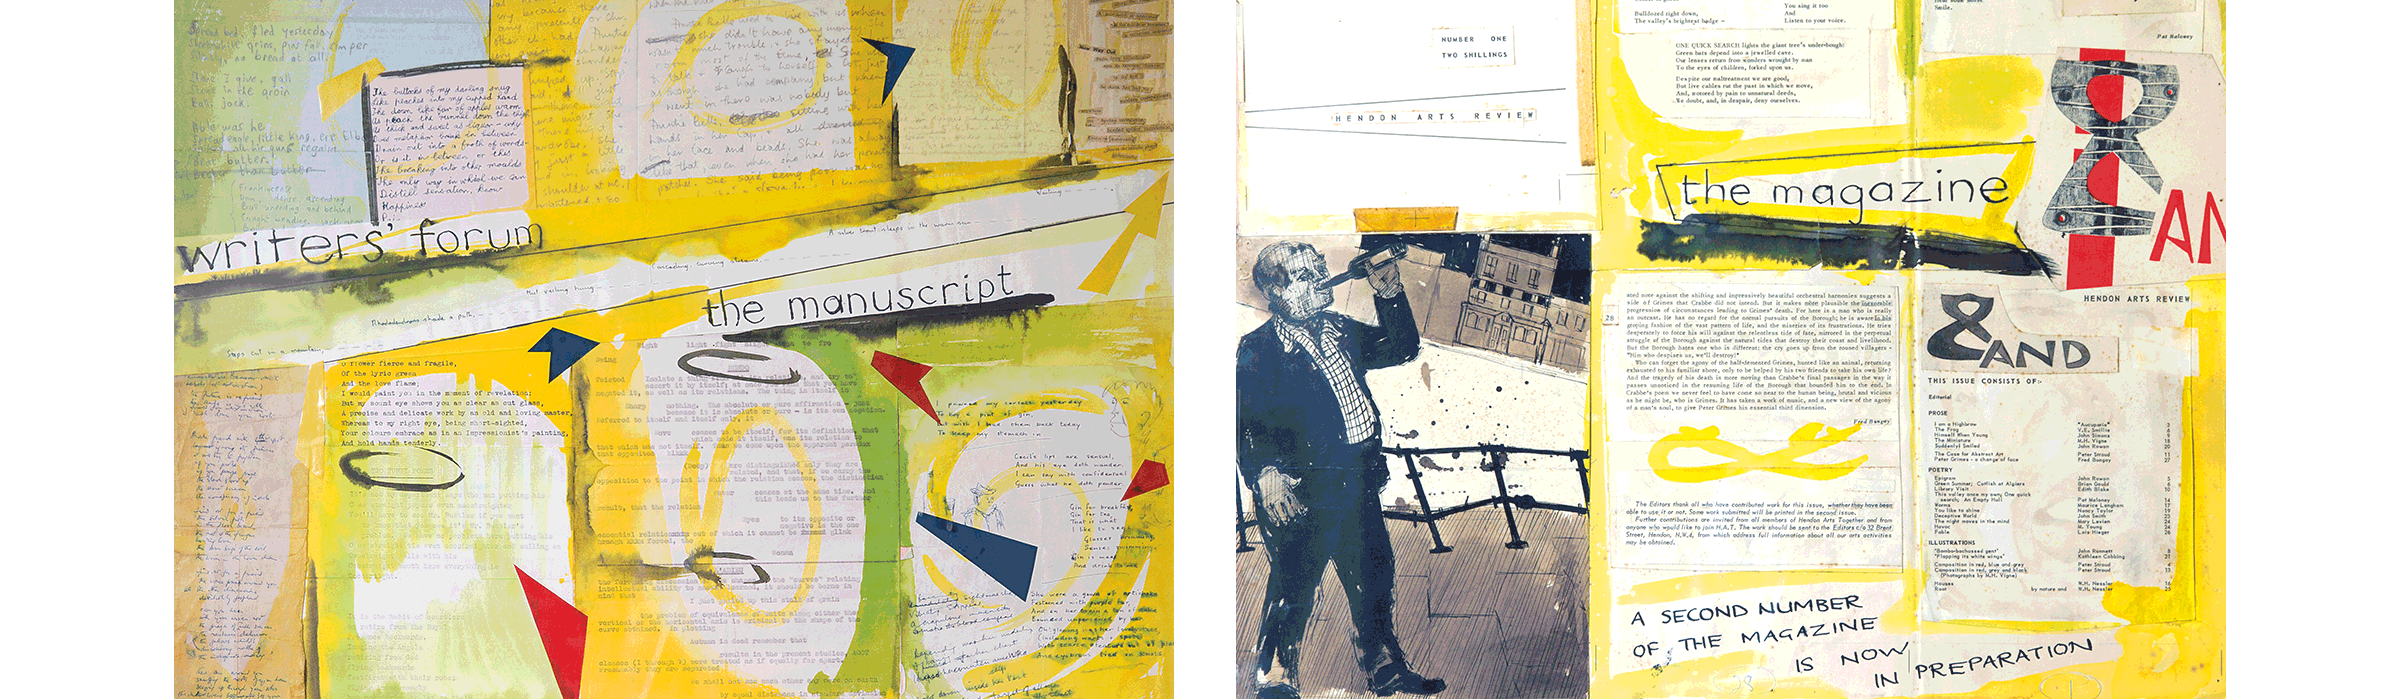 left to right: writers’ forum the manuscript, 1952; Collage for AND magazine, 1955.